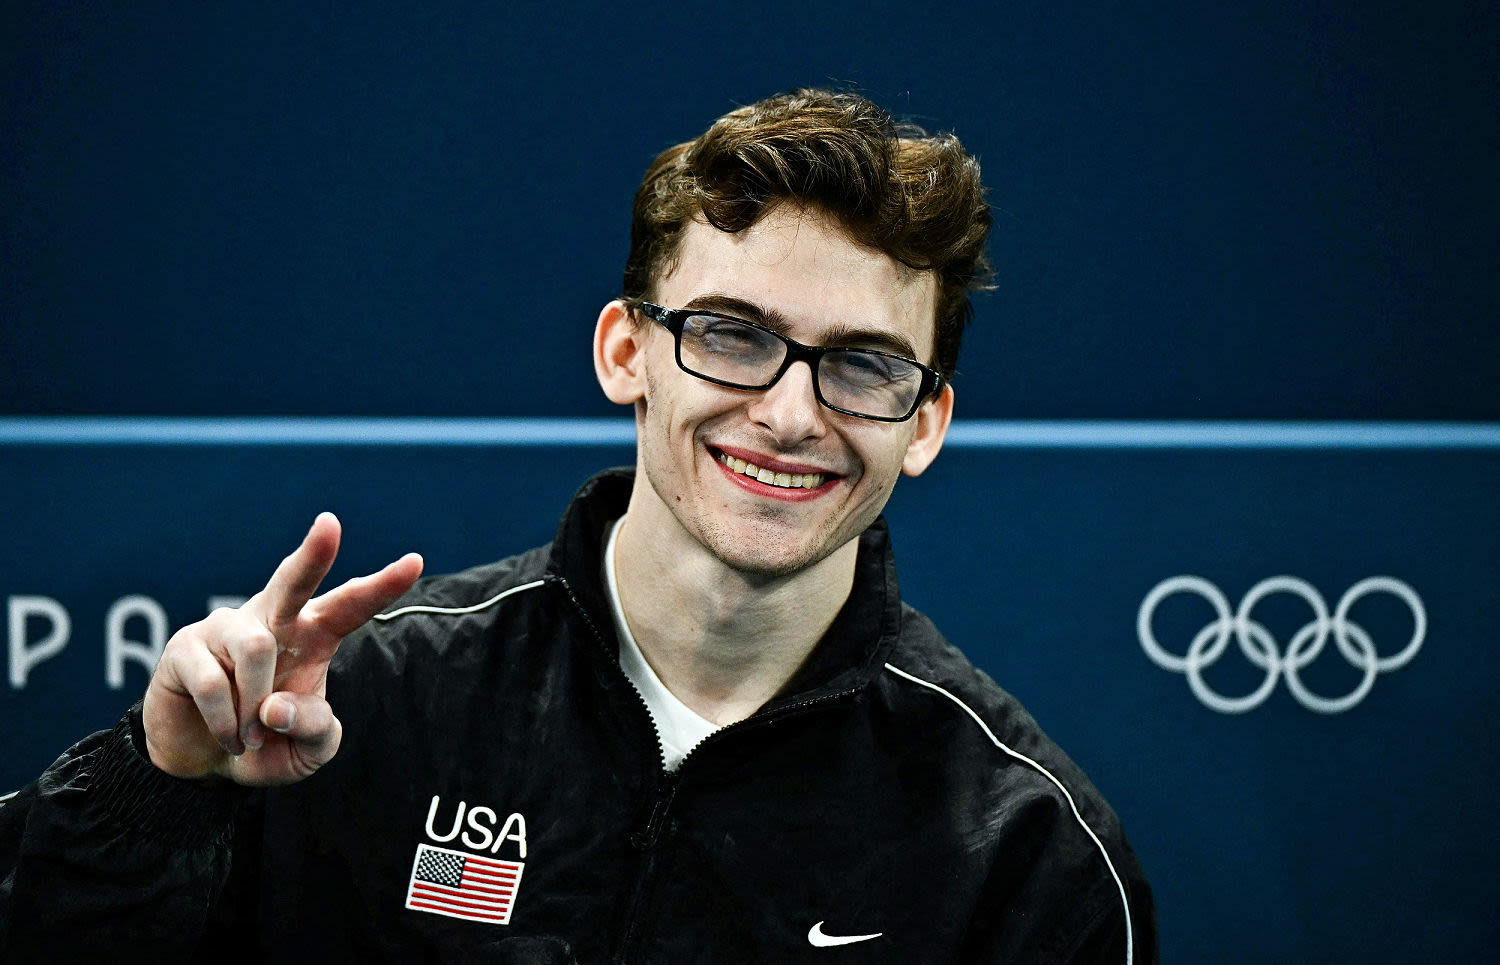 Why gymnast Stephen Nedoroscik wears glasses: What to know about his eyesight